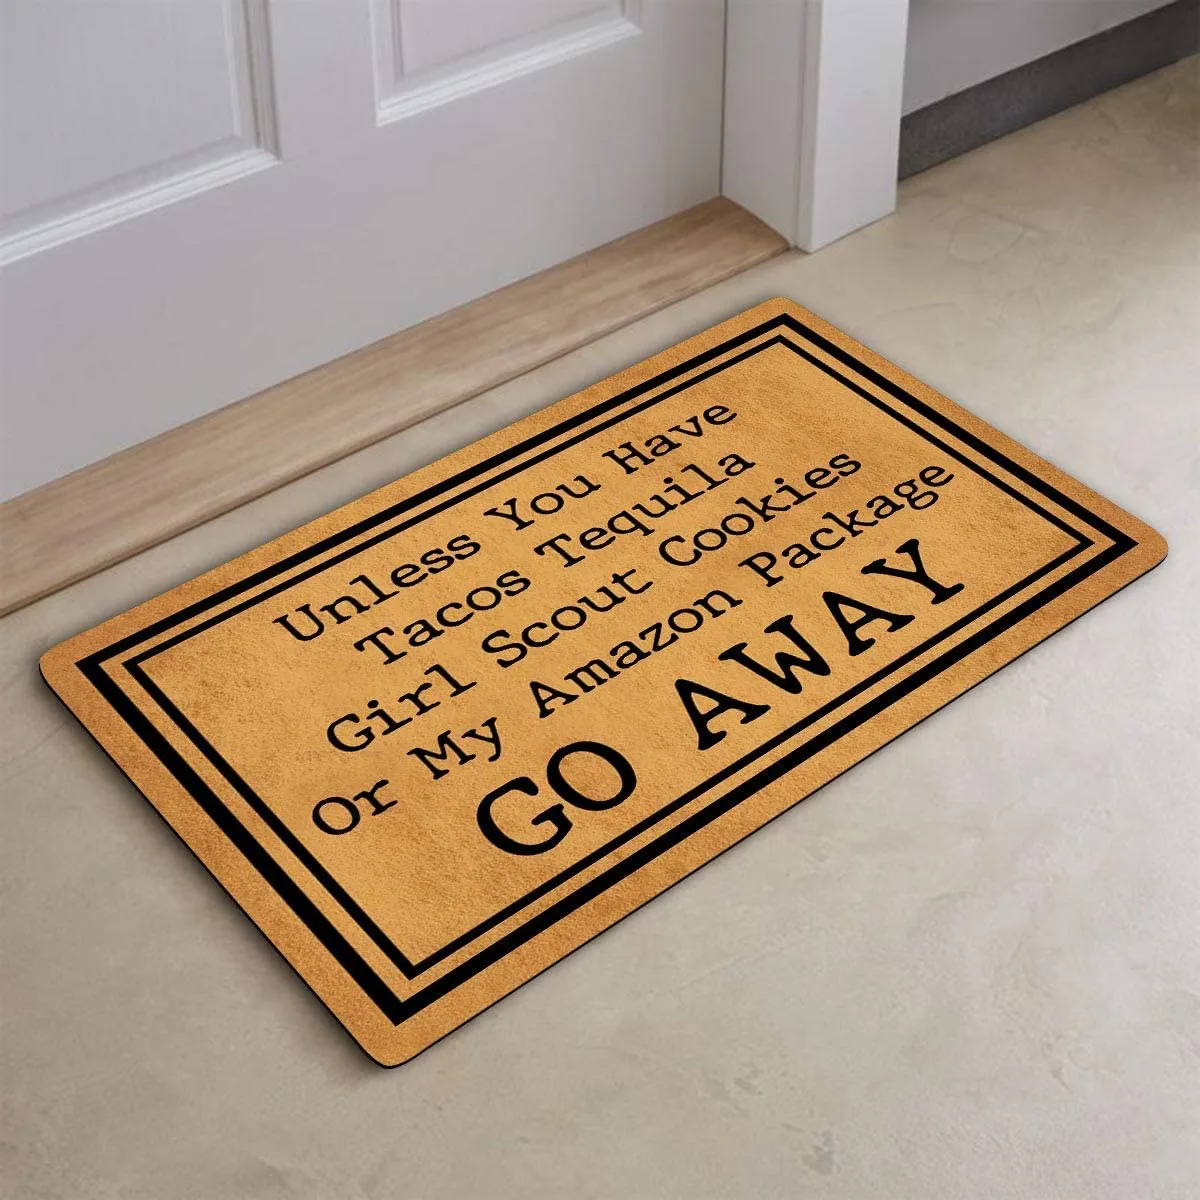 Funny Welcome Mats Outdoor, Front Door Mat for Outside Entry